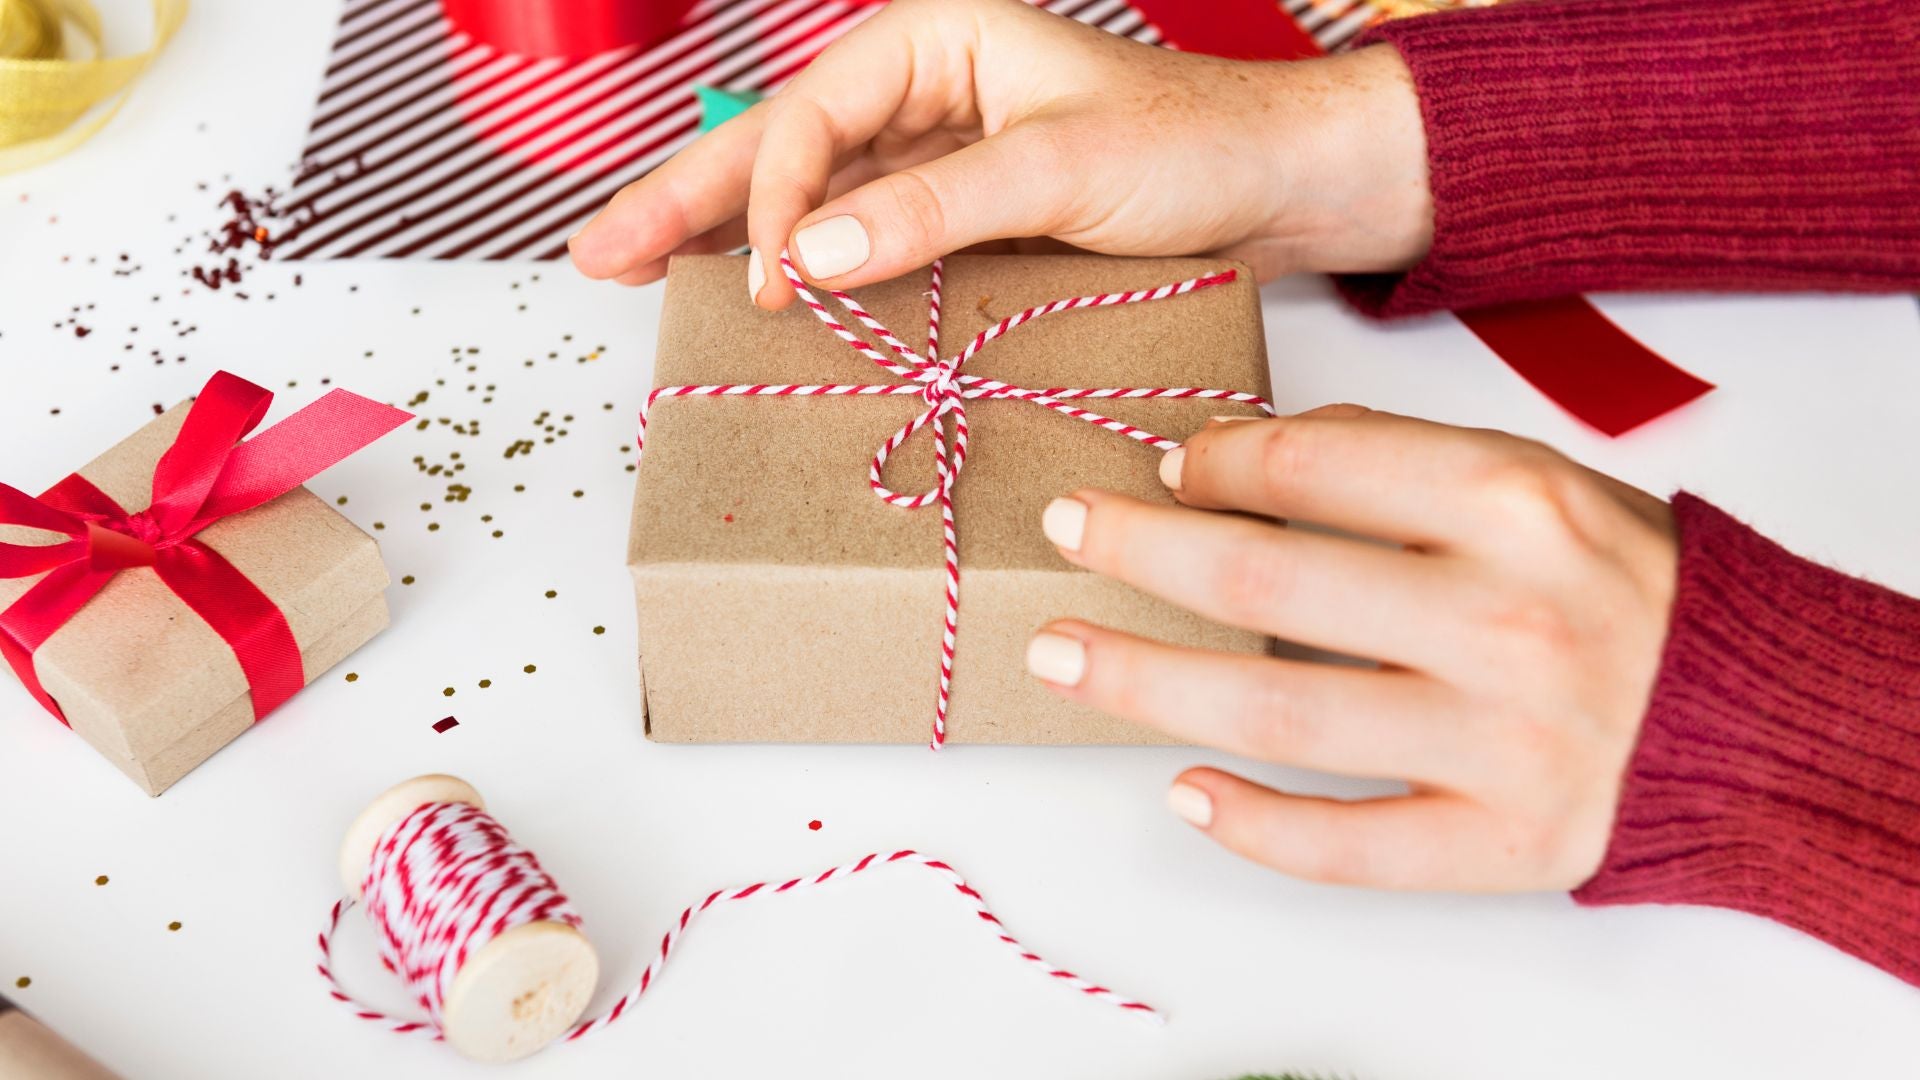 Festive Packaging: Adding a Touch of Celebration to Your Products